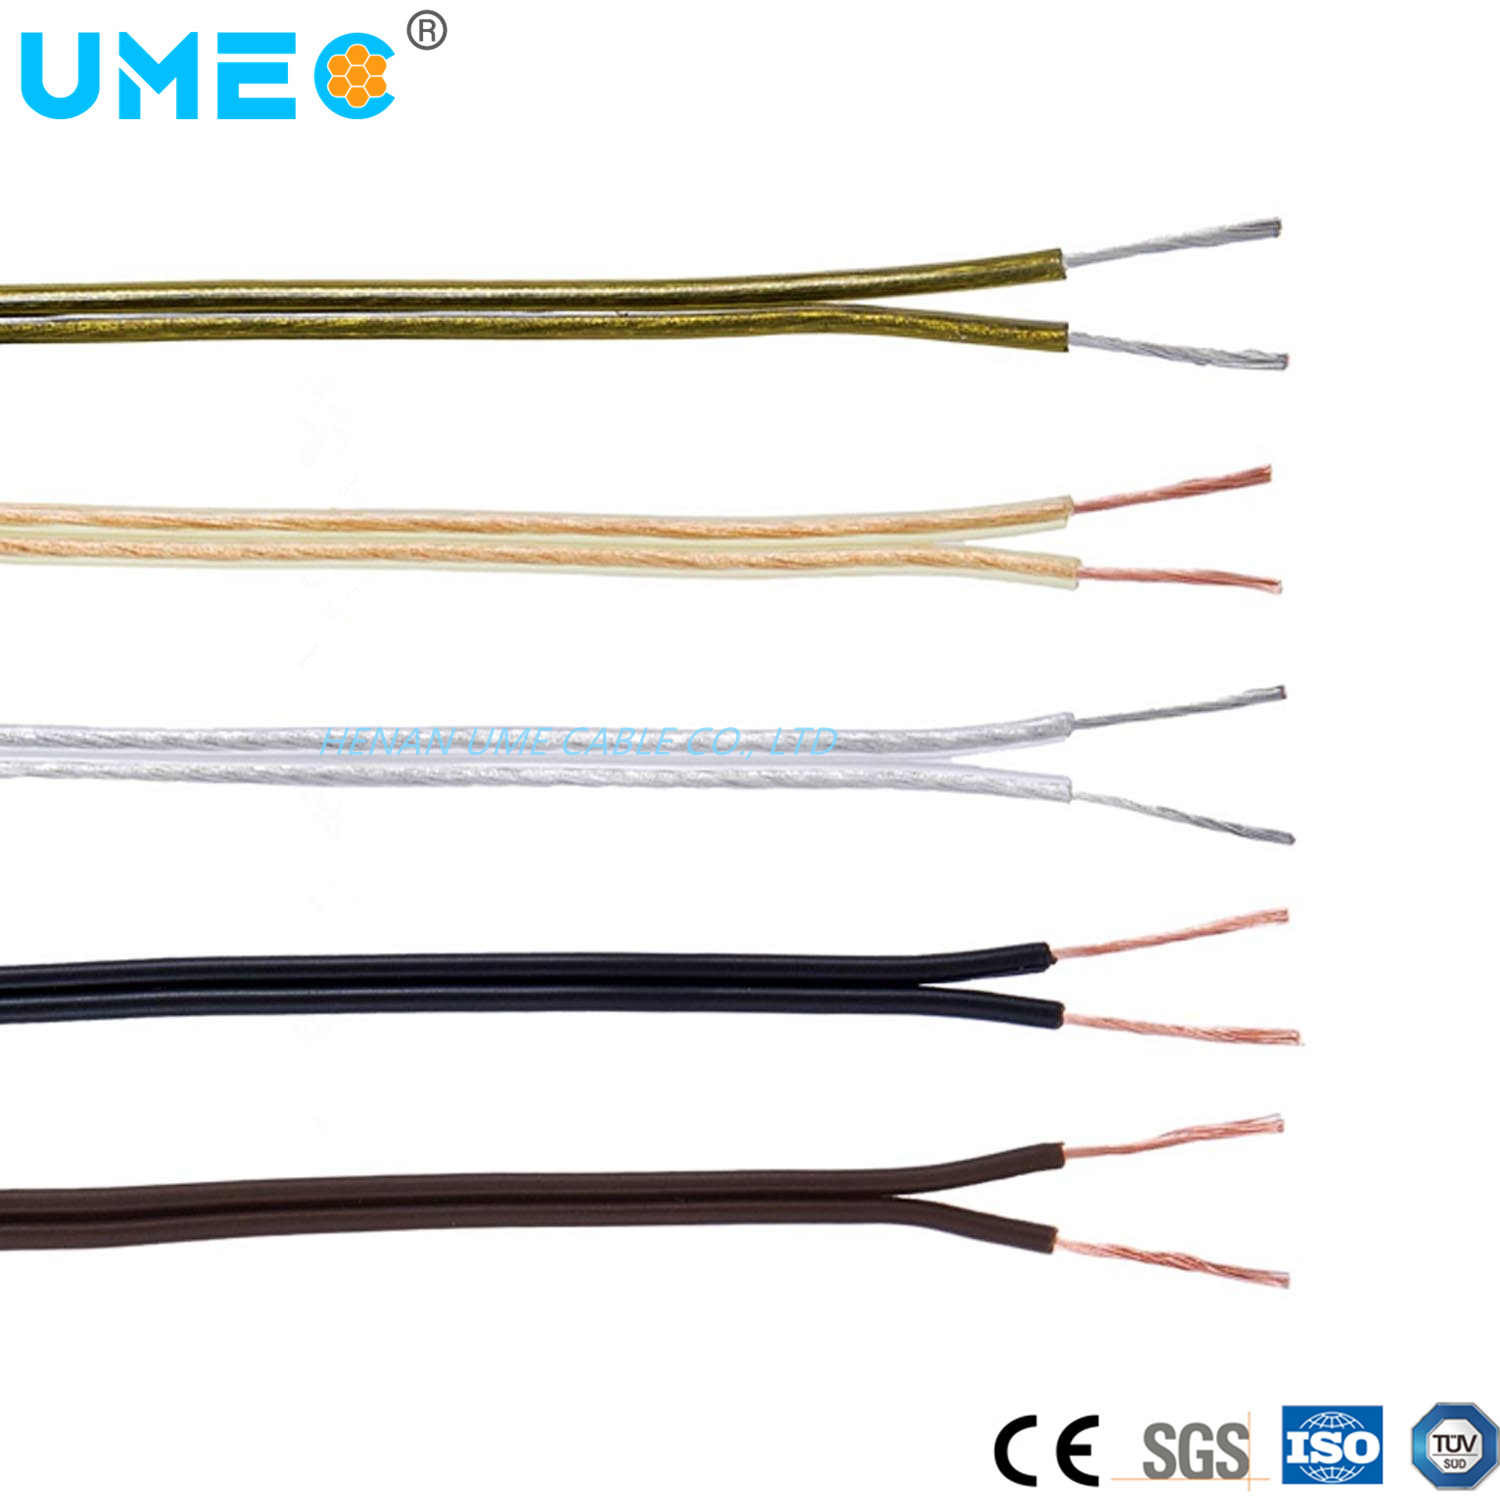 300/500V Stranded Conductor Spt Tinned Copper Wire PVC Insulated Parallel Flat Twin Cable 2c*14/16/18/20AWG